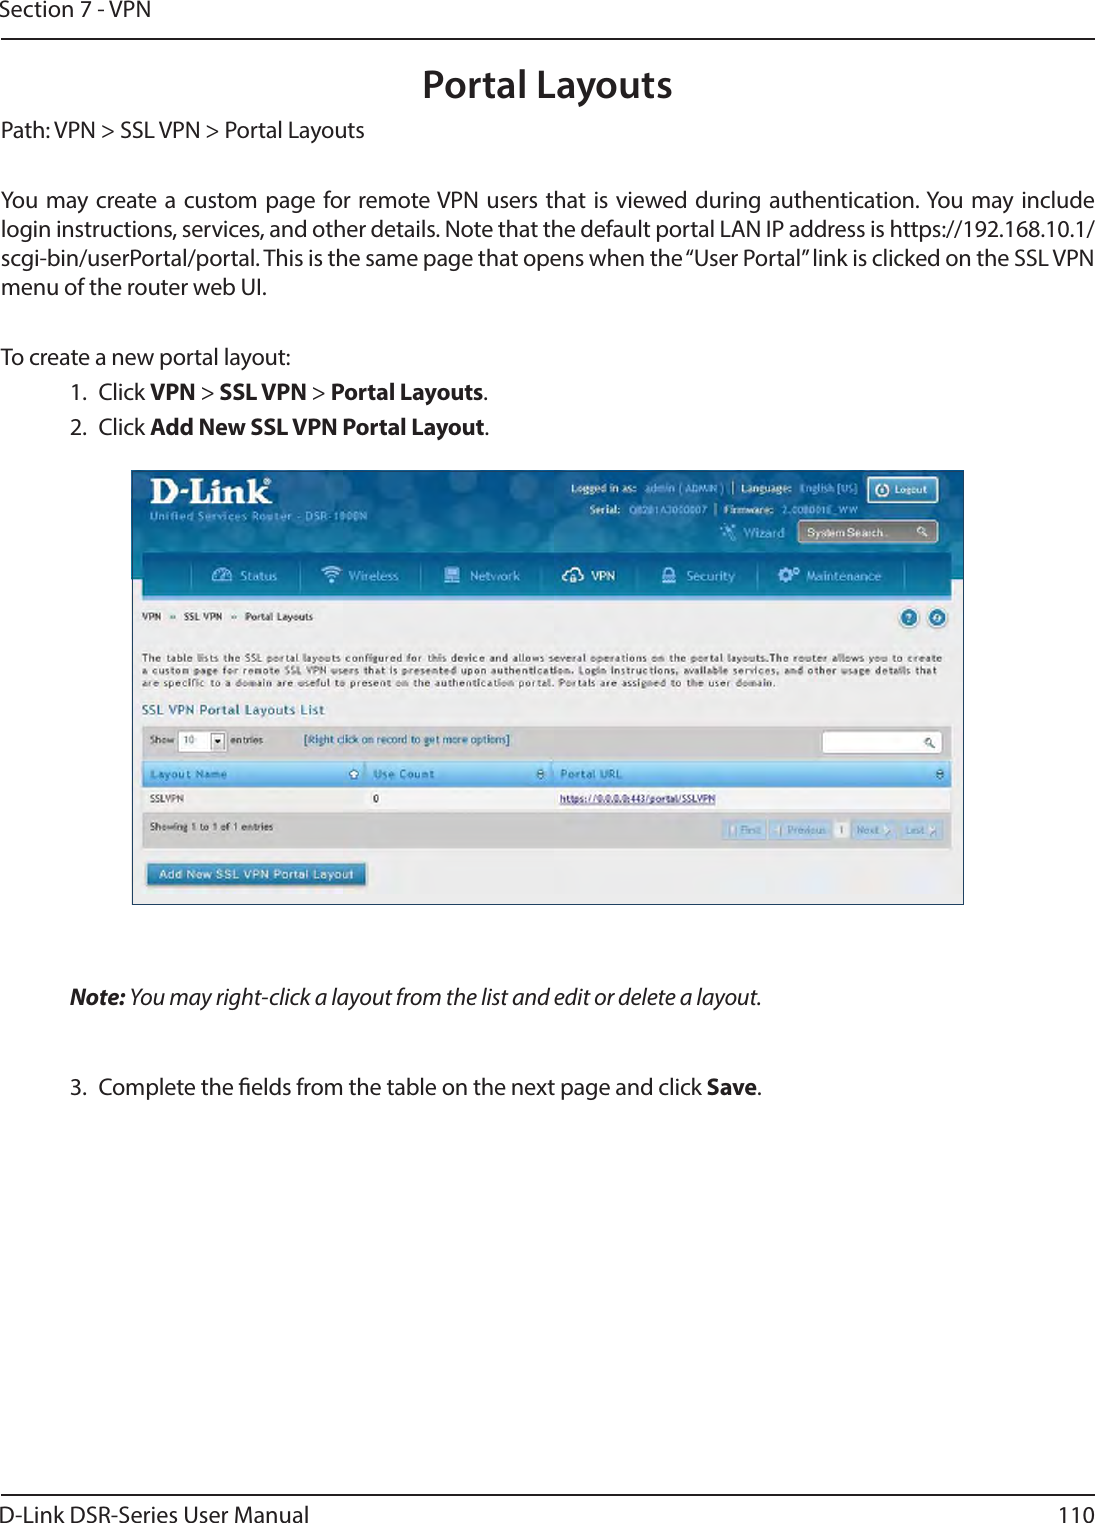 D-Link DSR-Series User Manual 110Section 7 - VPNPortal LayoutsPath: VPN &gt; SSL VPN &gt; Portal LayoutsYou may create a custom page for remote VPN users that is viewed during authentication. You may include login instructions, services, and other details. Note that the default portal LAN IP address is https://192.168.10.1/scgi-bin/userPortal/portal. This is the same page that opens when the “User Portal” link is clicked on the SSL VPN menu of the router web UI. To create a new portal layout:1. Click VPN &gt; SSL VPN &gt; Portal Layouts.2. Click Add New SSL VPN Portal Layout.Note: You may right-click a layout from the list and edit or delete a layout.3.  Complete the elds from the table on the next page and click Save.